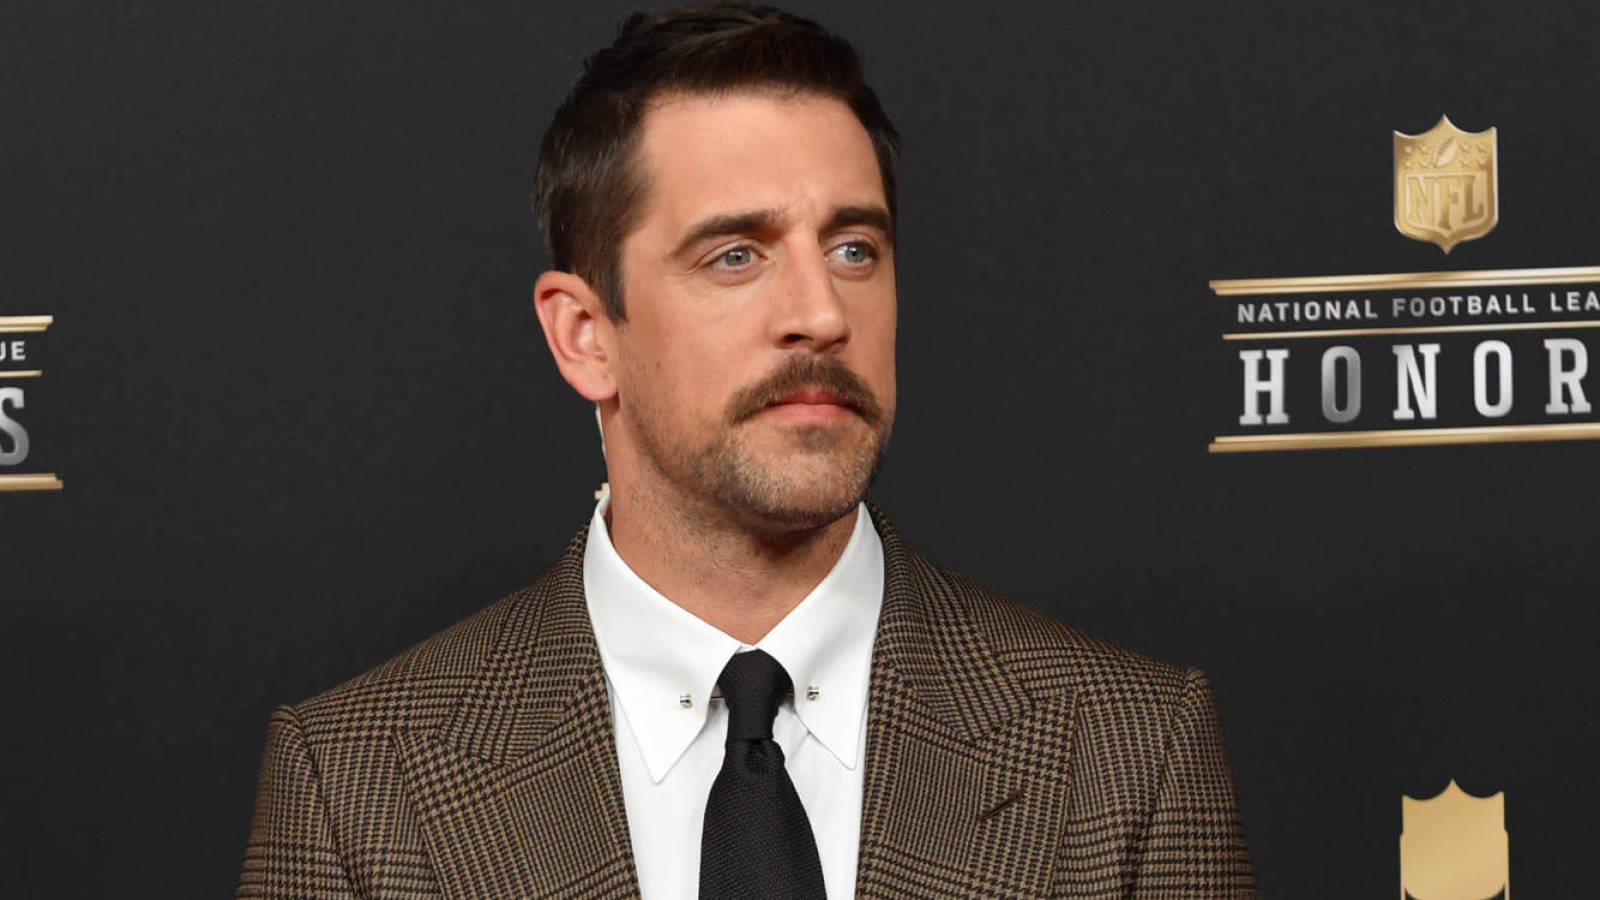 Aaron Rodgers shaved off his beard in favor of a glorious mustache